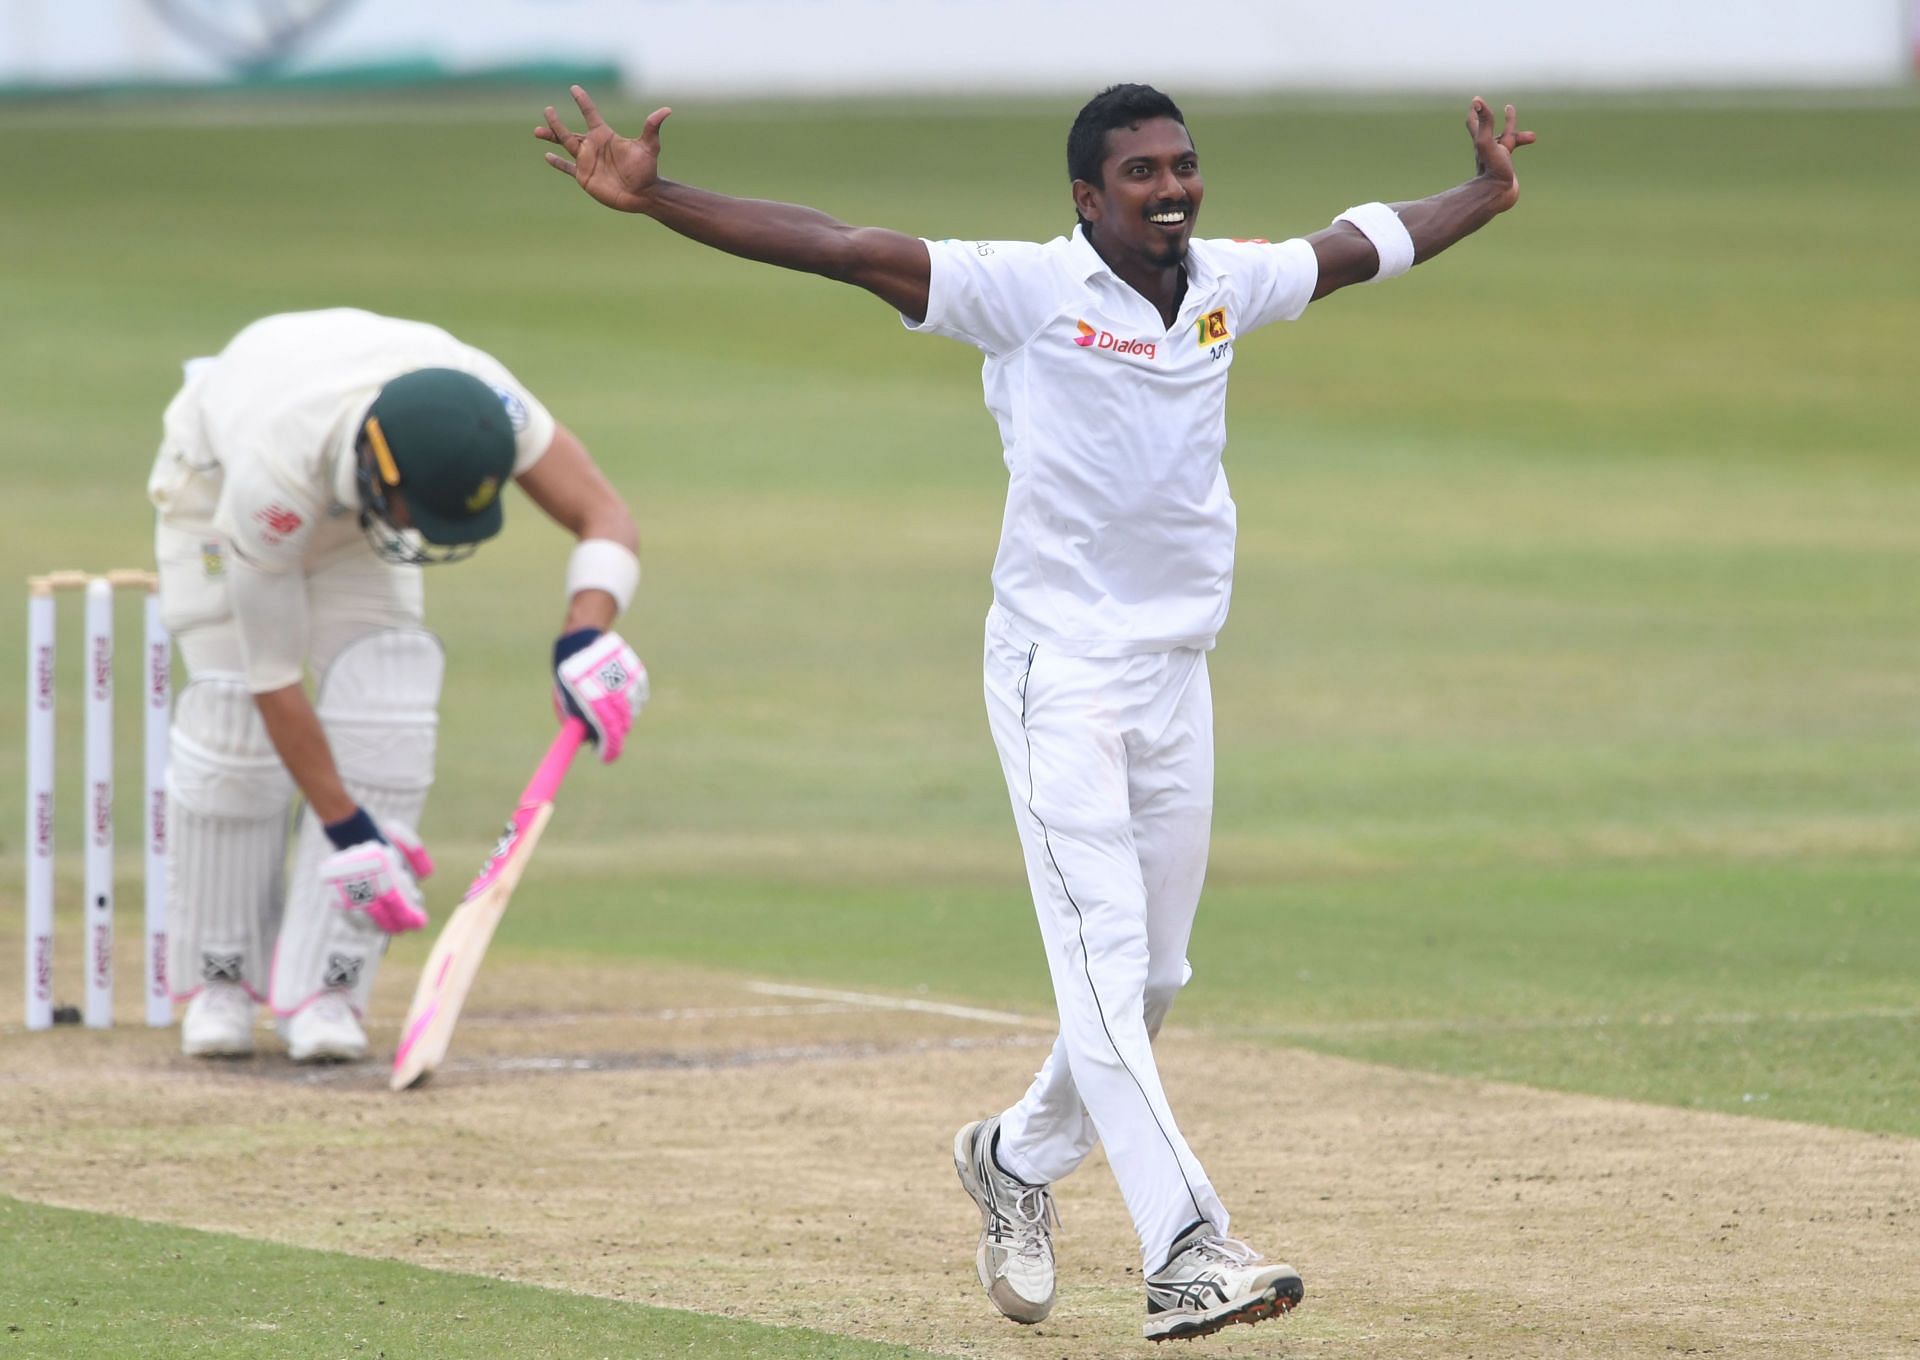 Lasith Embuldeniya is likely to lead the Sri Lankan spin attack against India